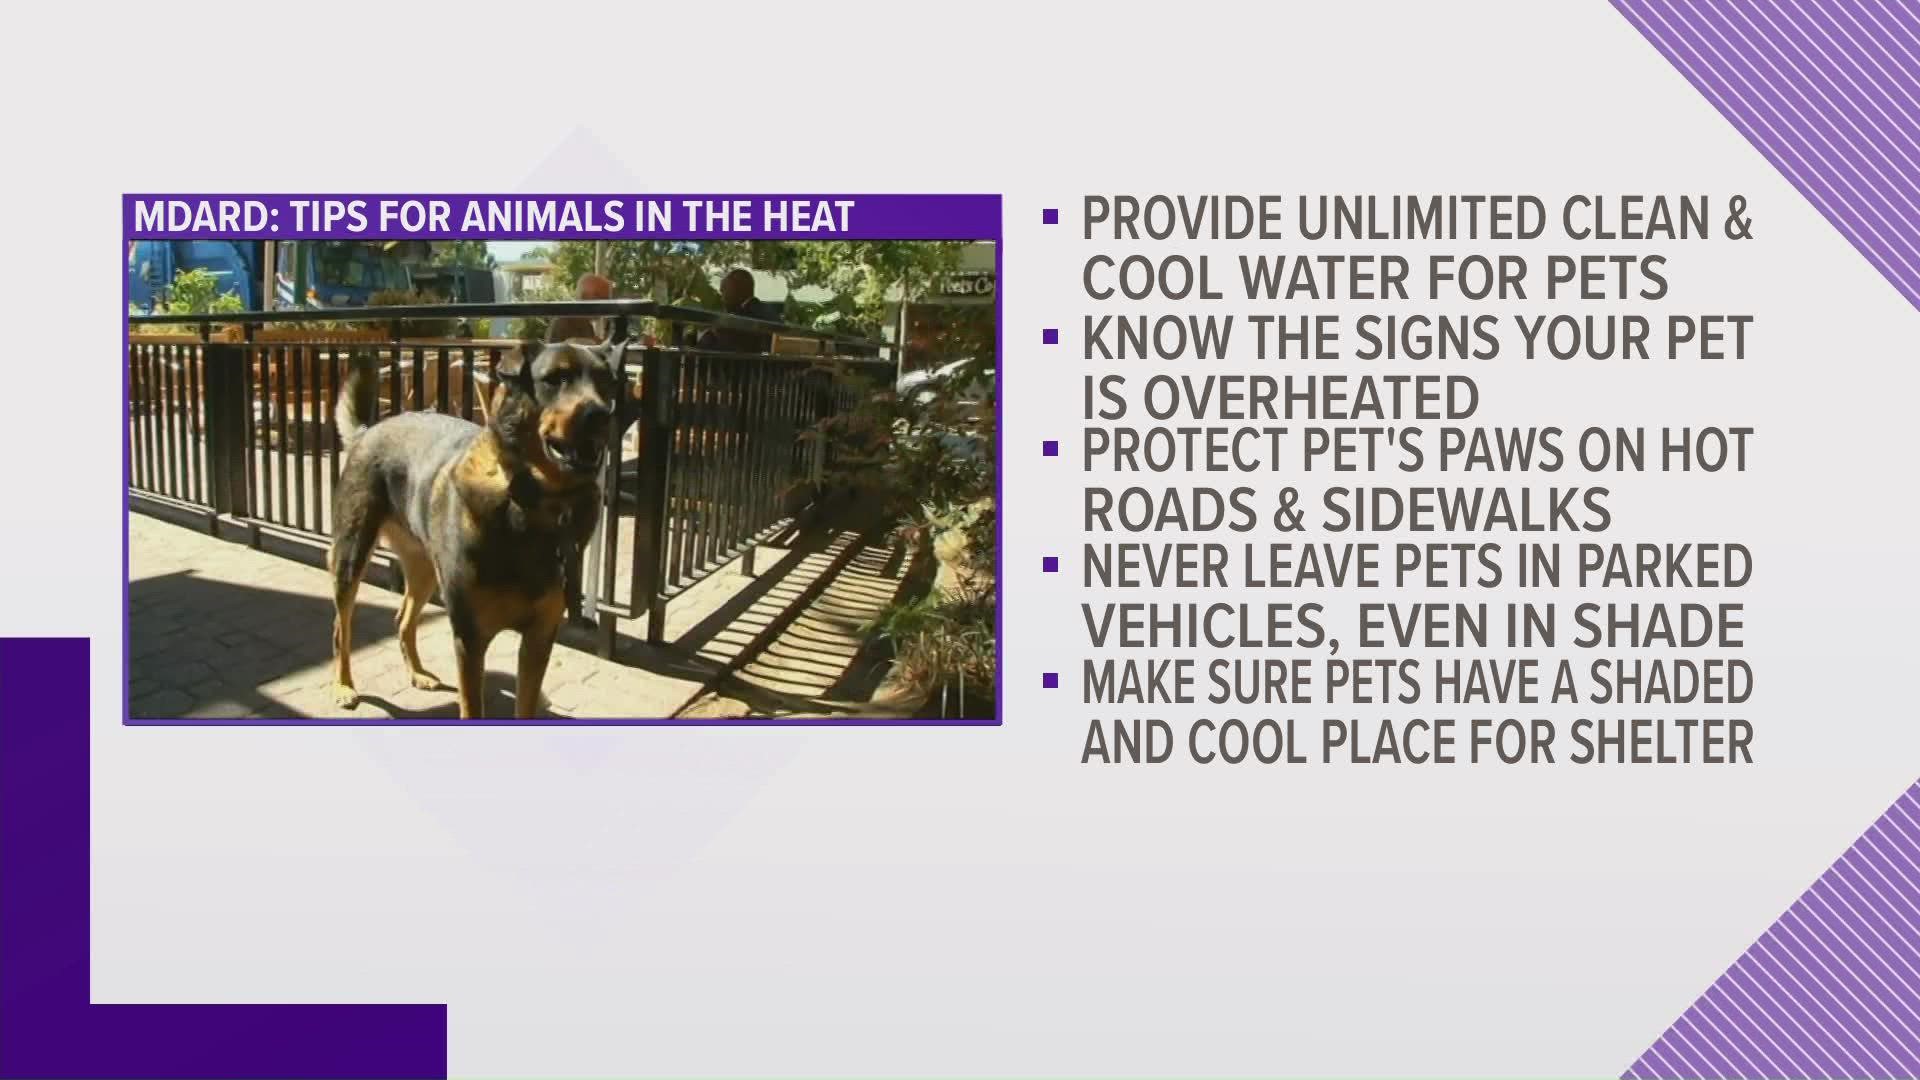 Humans aren't the only ones who need to keep cool in the heat. Make sure you don't forget about your furry friends, and there are plenty of ways to protect them.